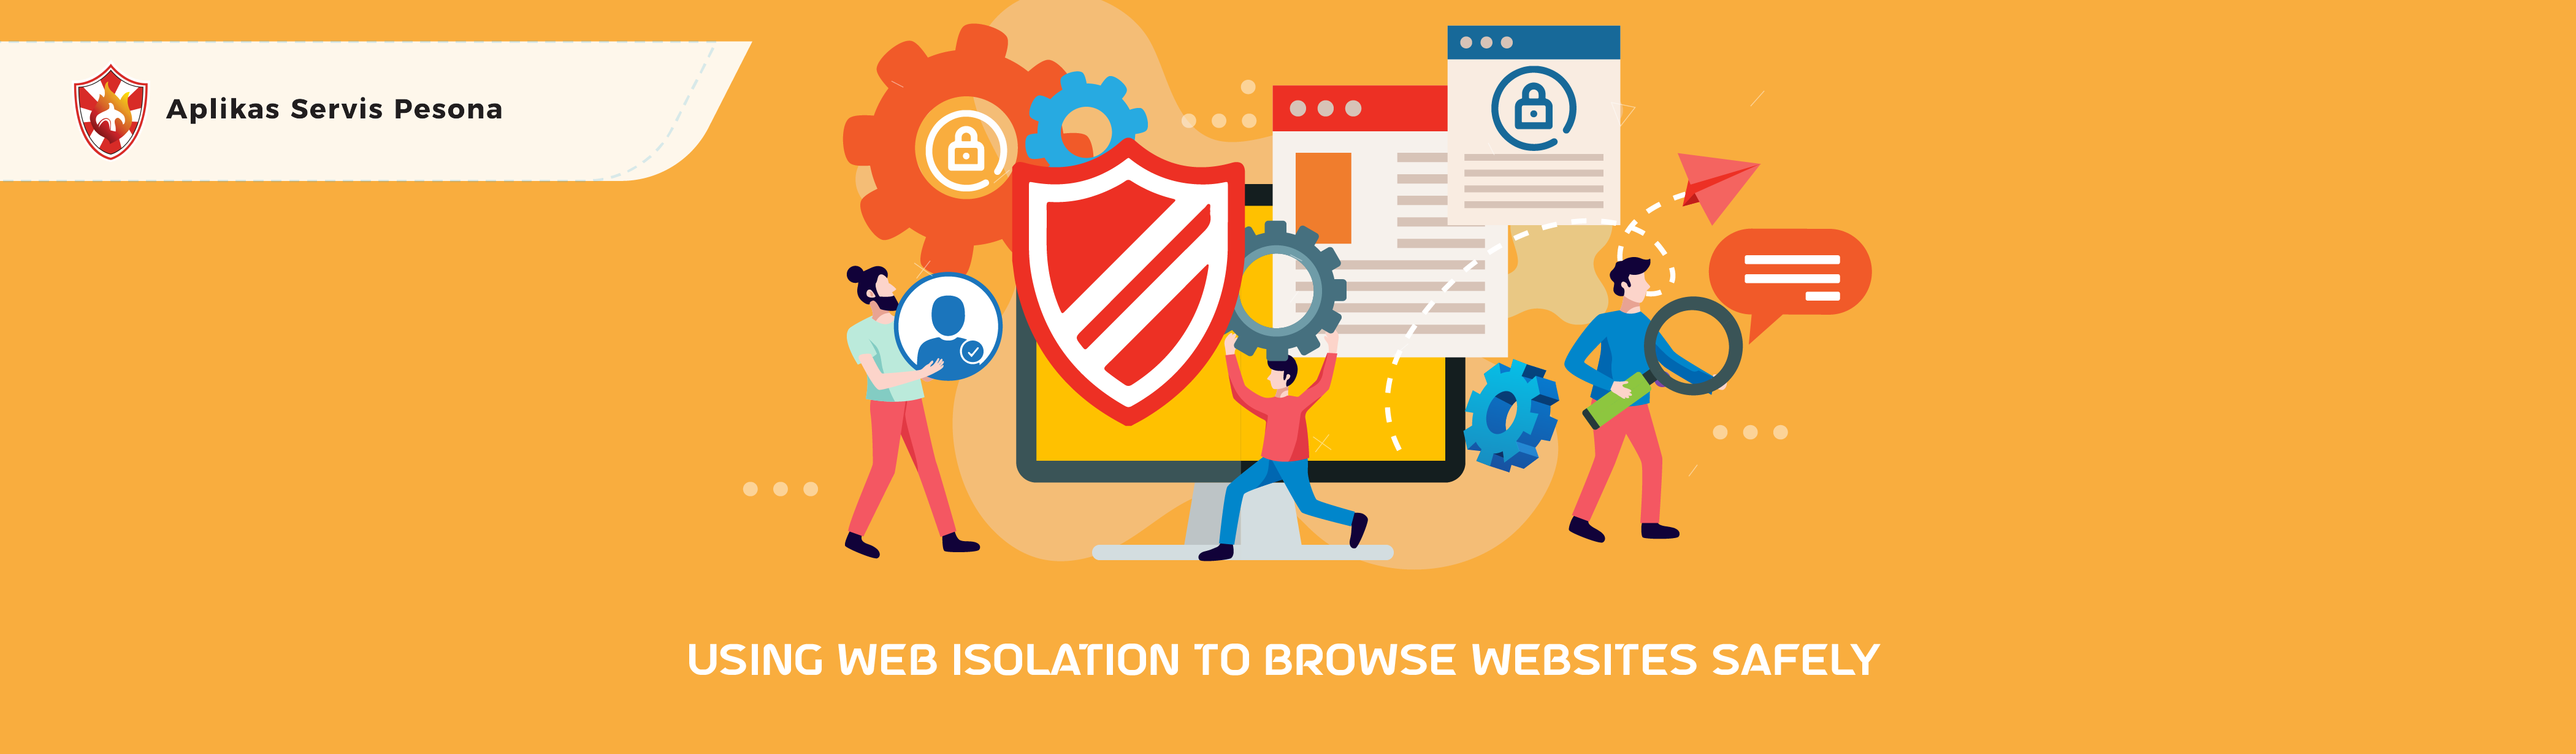 Using Web Isolation Solutions to Browse the Websites Safely